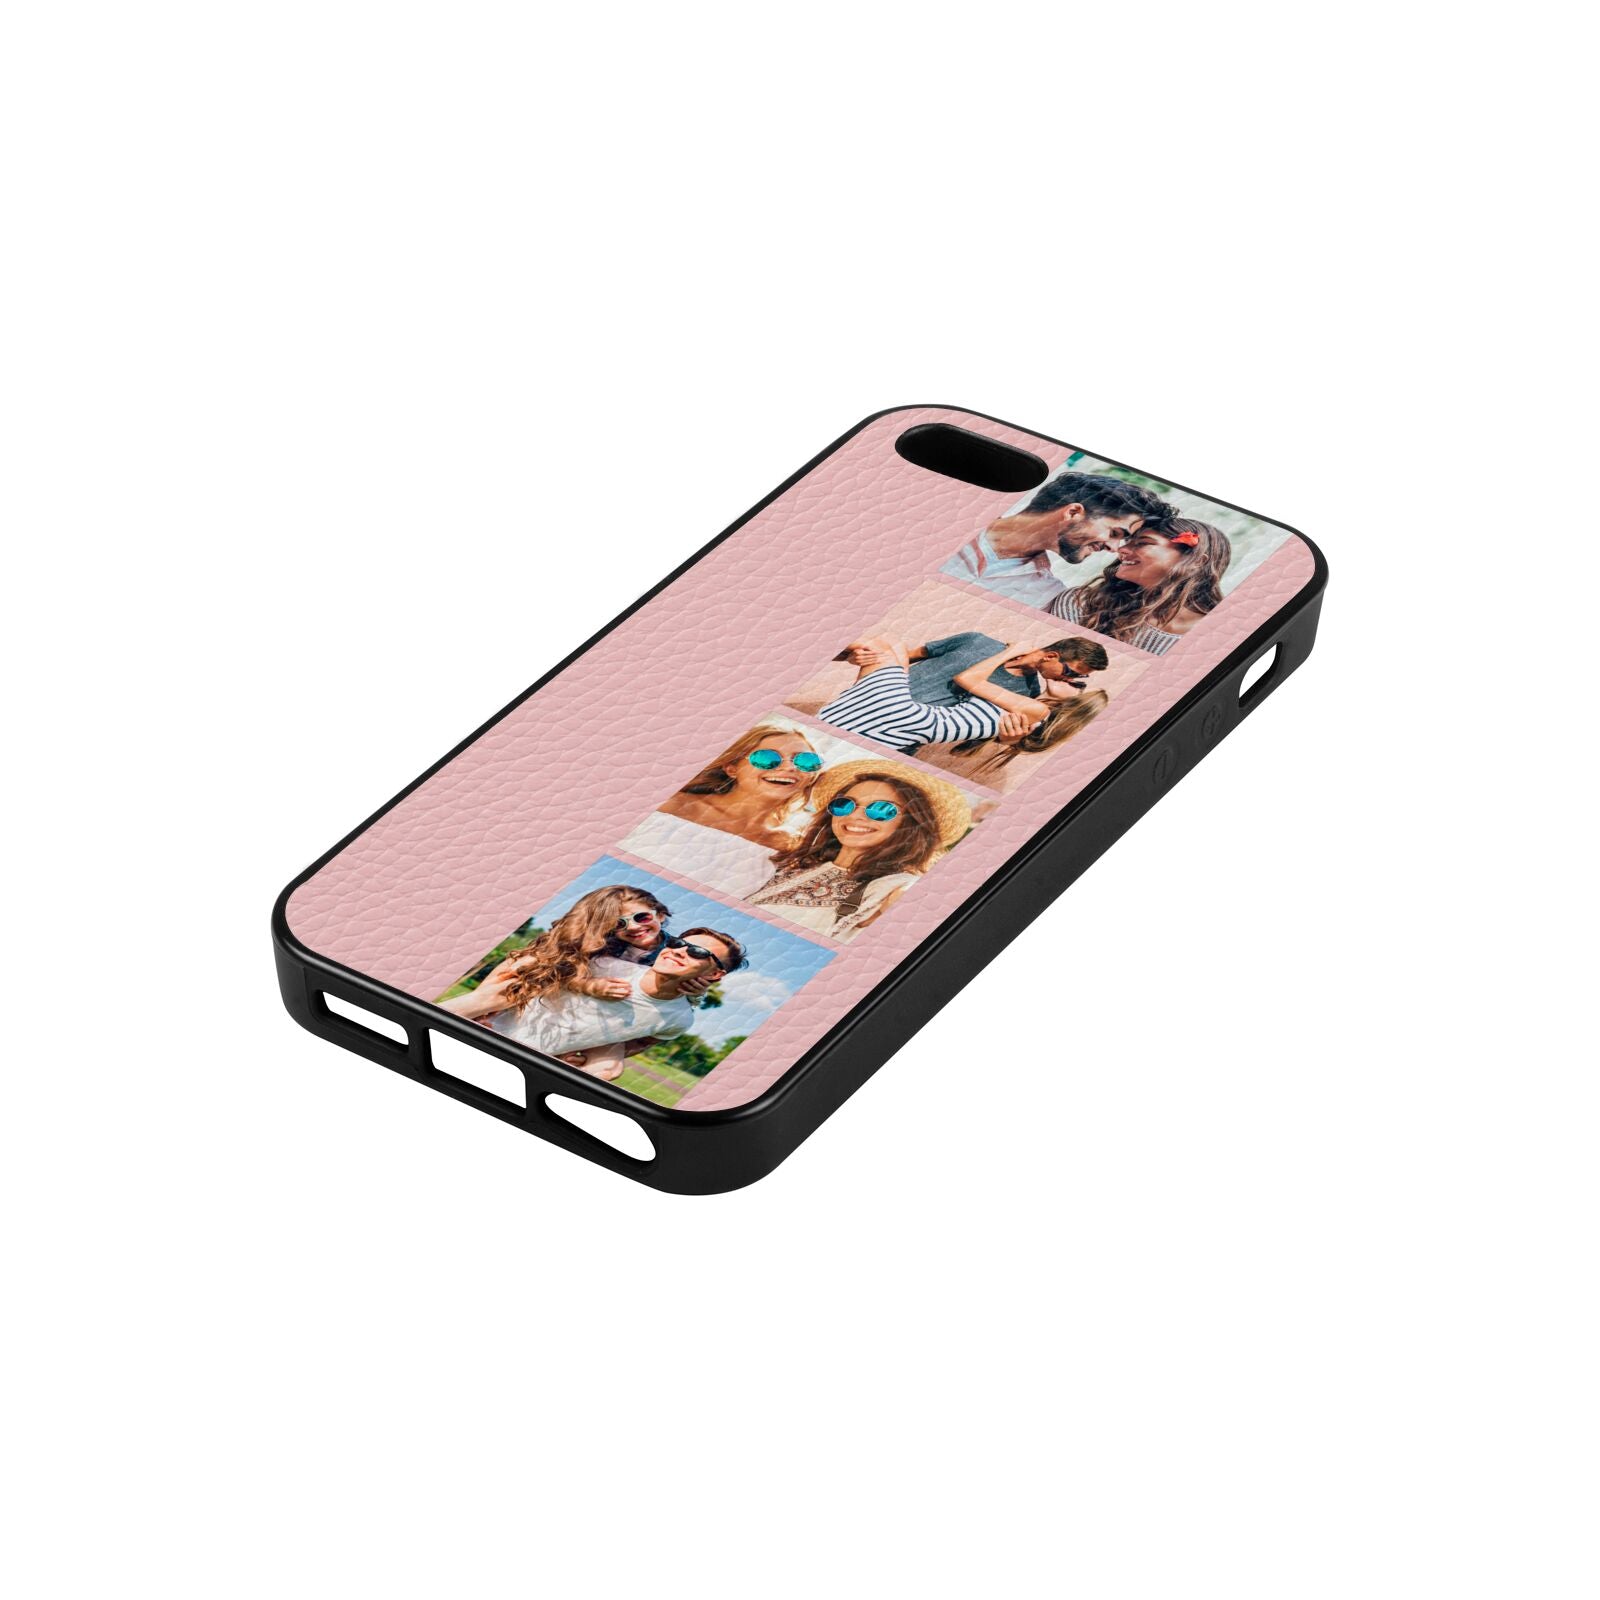 Photo Strip Montage Upload Pink Pebble Leather iPhone 5 Case Side Angle